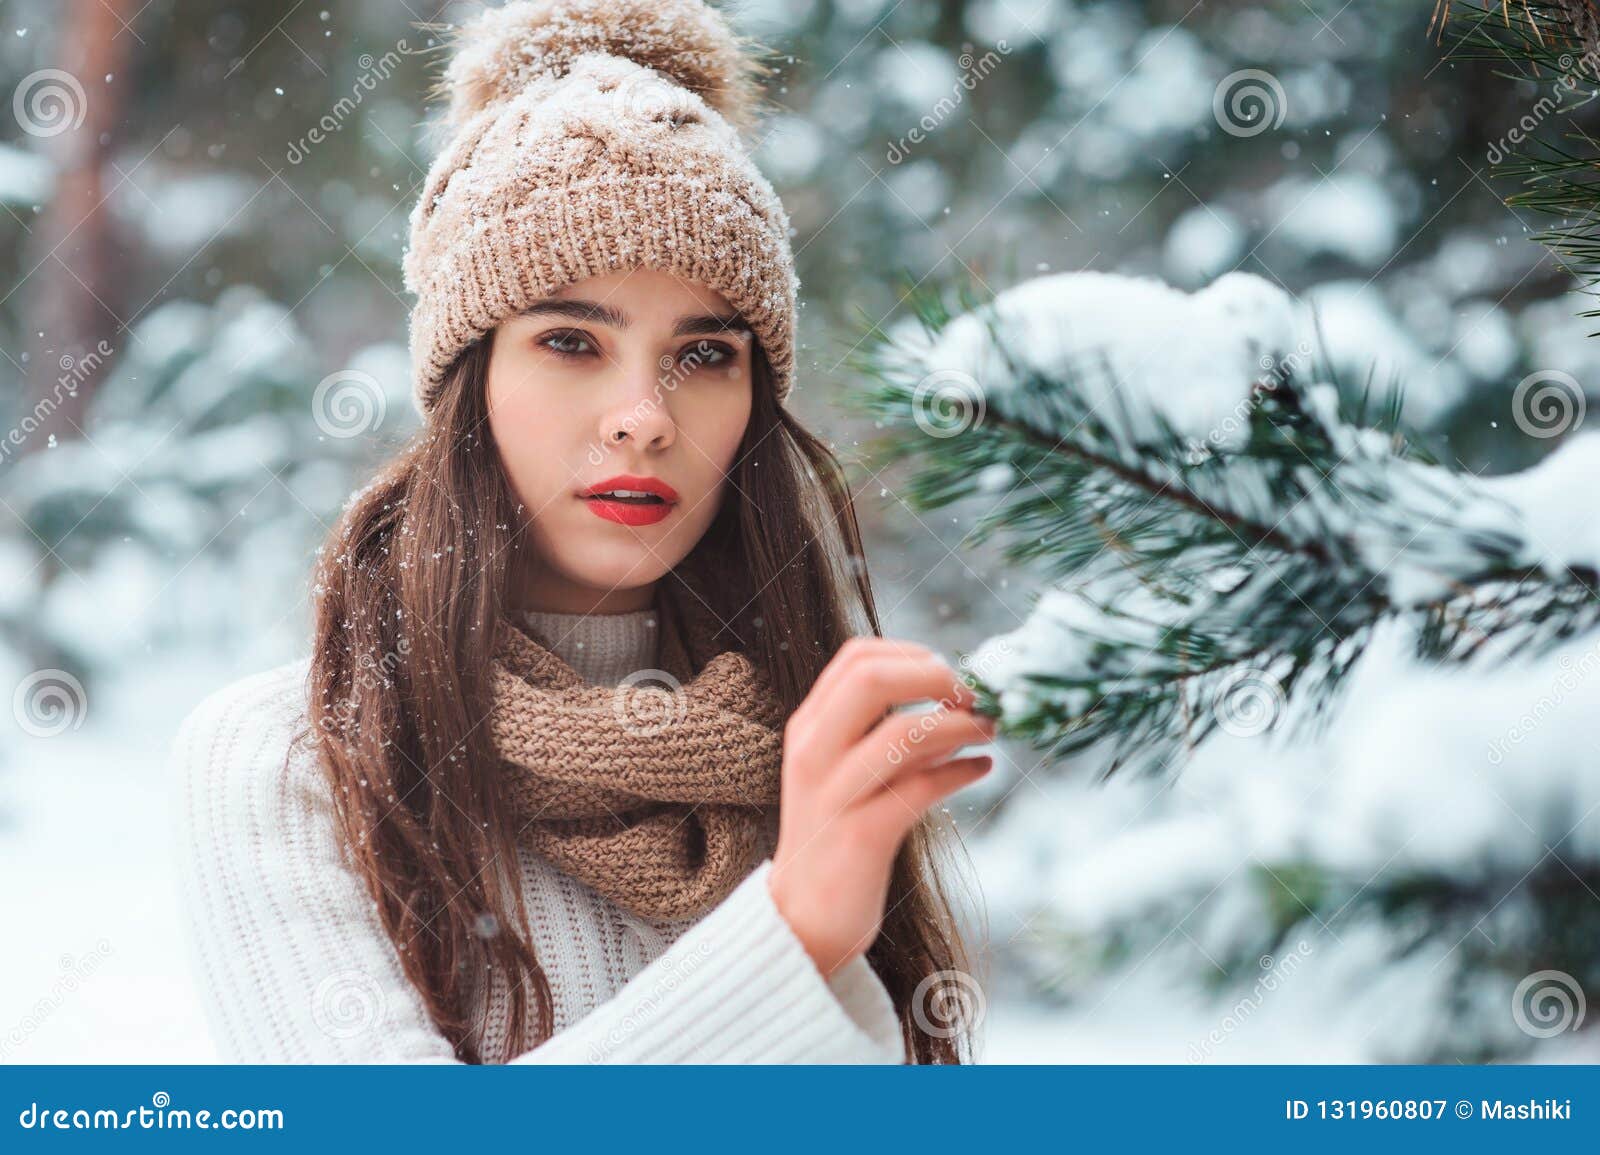 Close Up Winter Portrait of Smiling Young Woman Walking in Snowy Forest ...